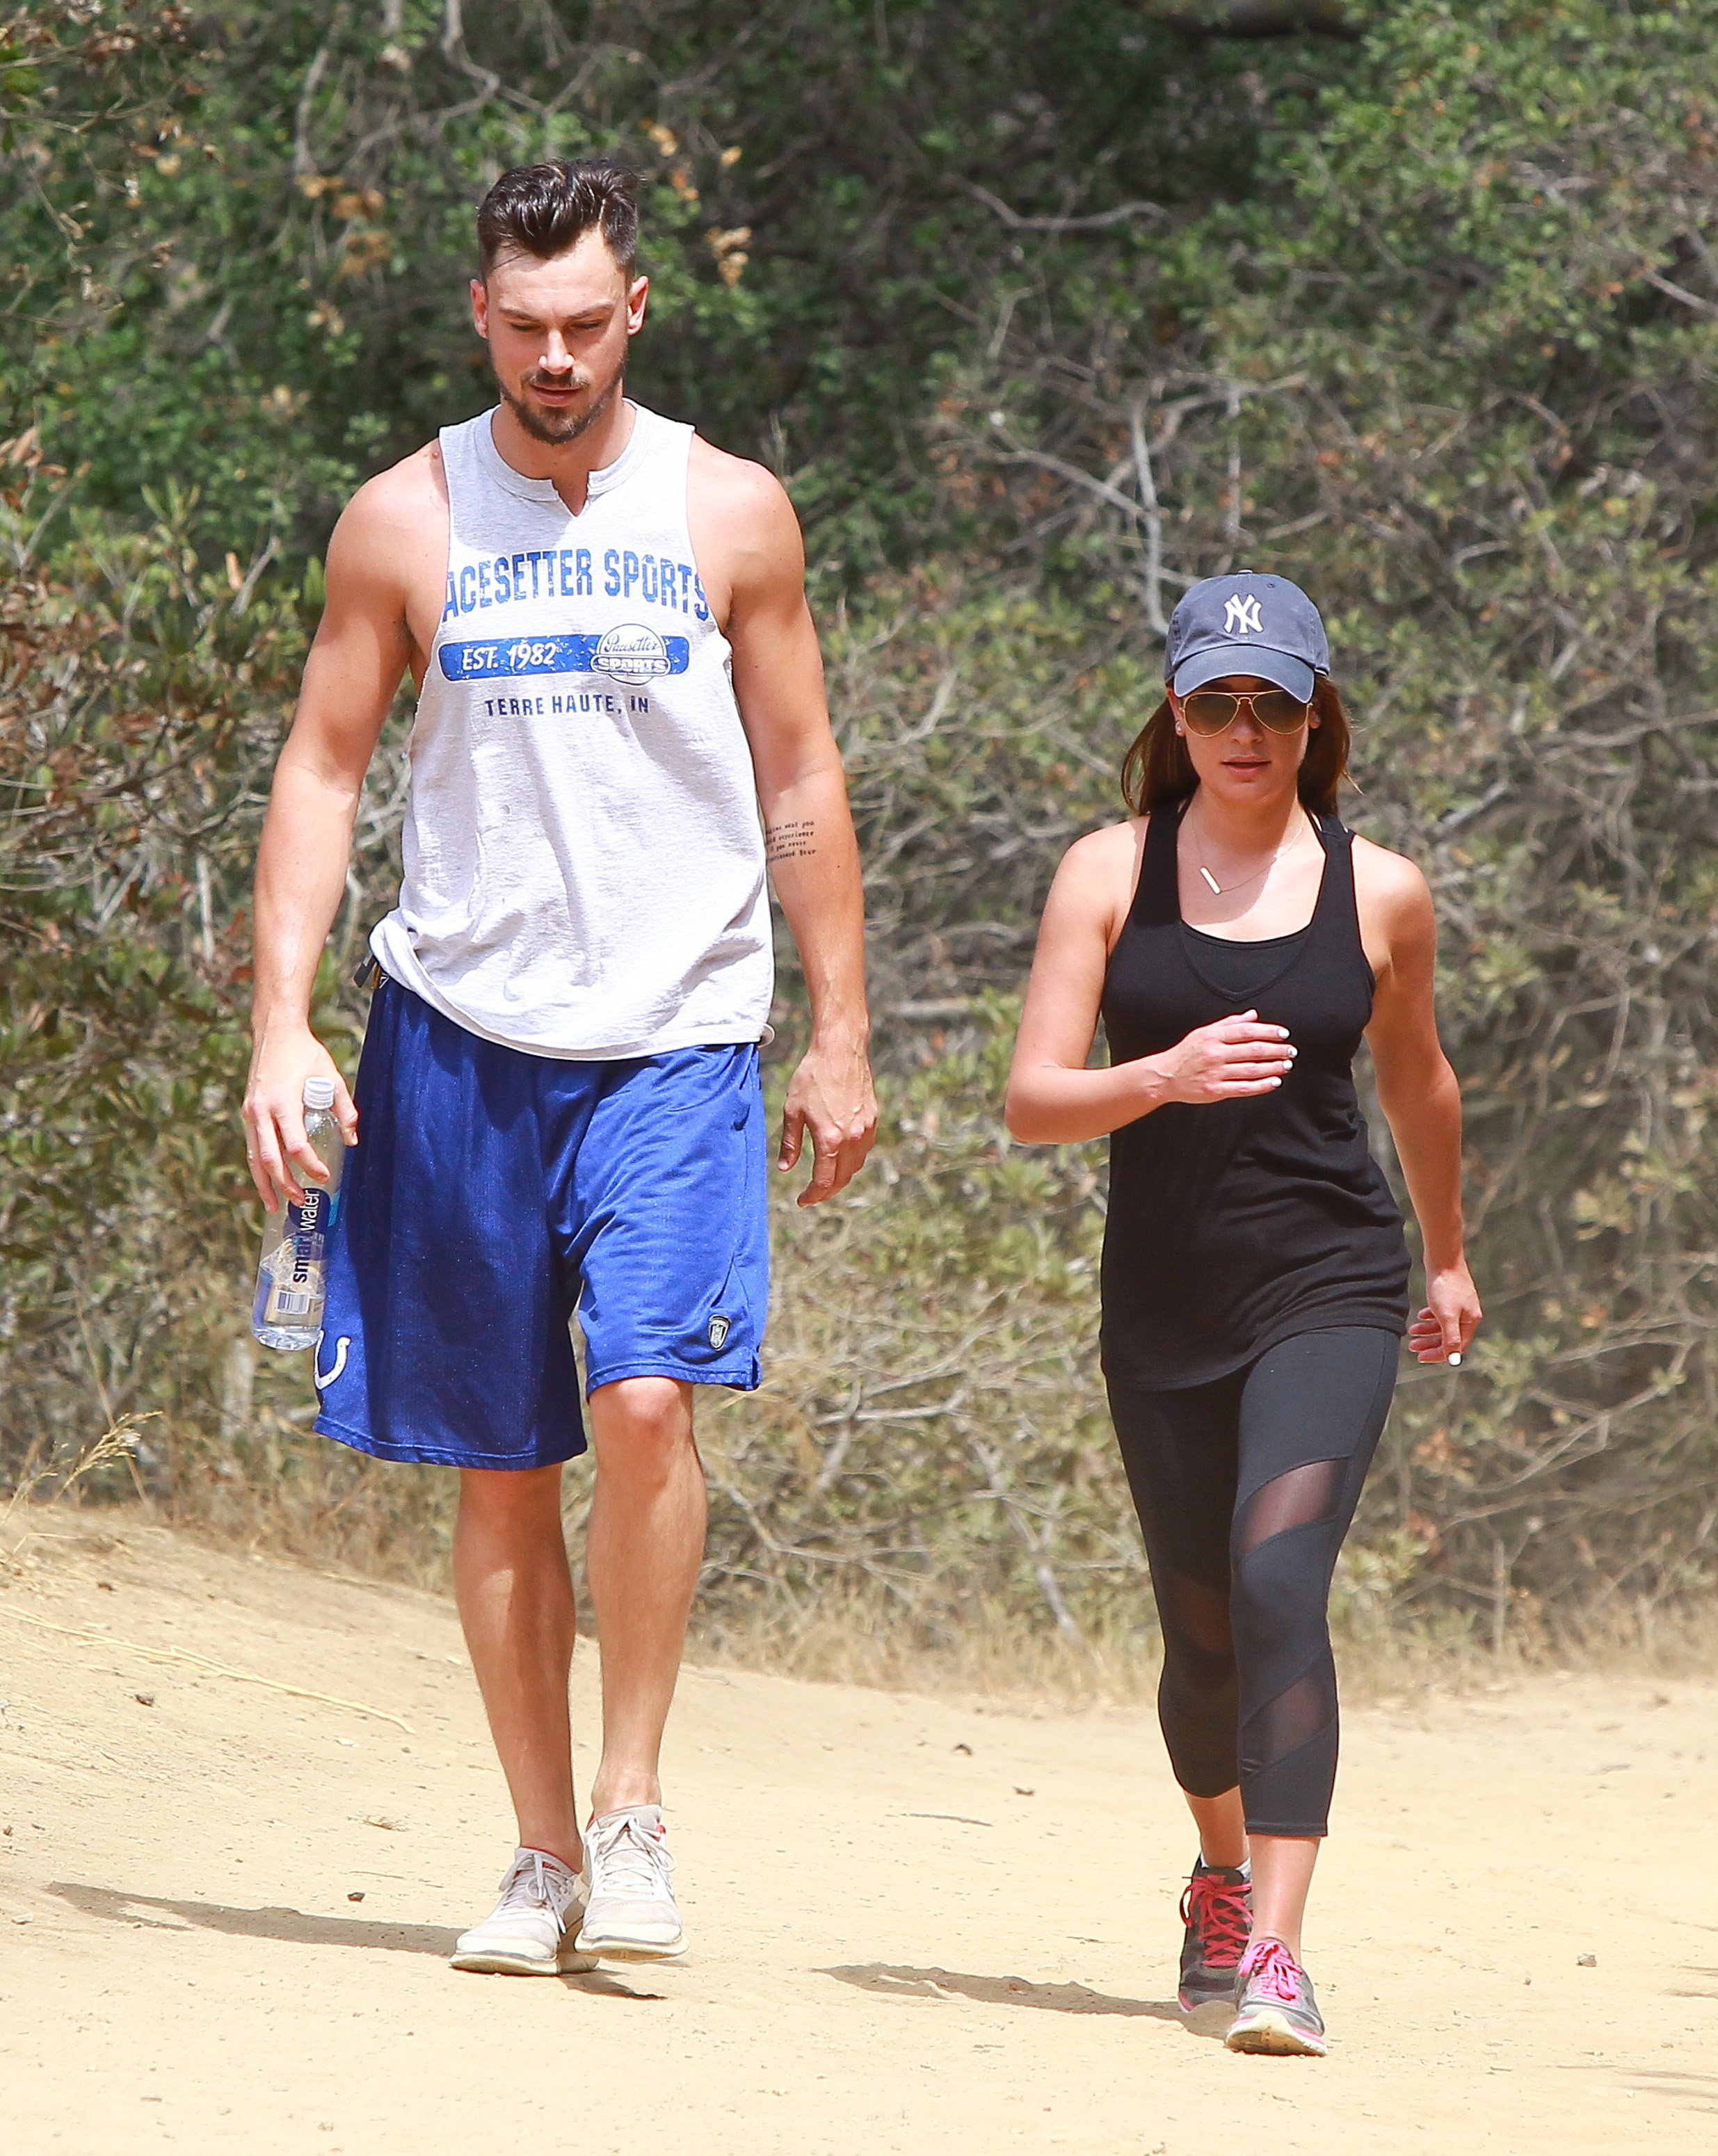 See These 11 Celebrity Couples With Crazy Height Differences